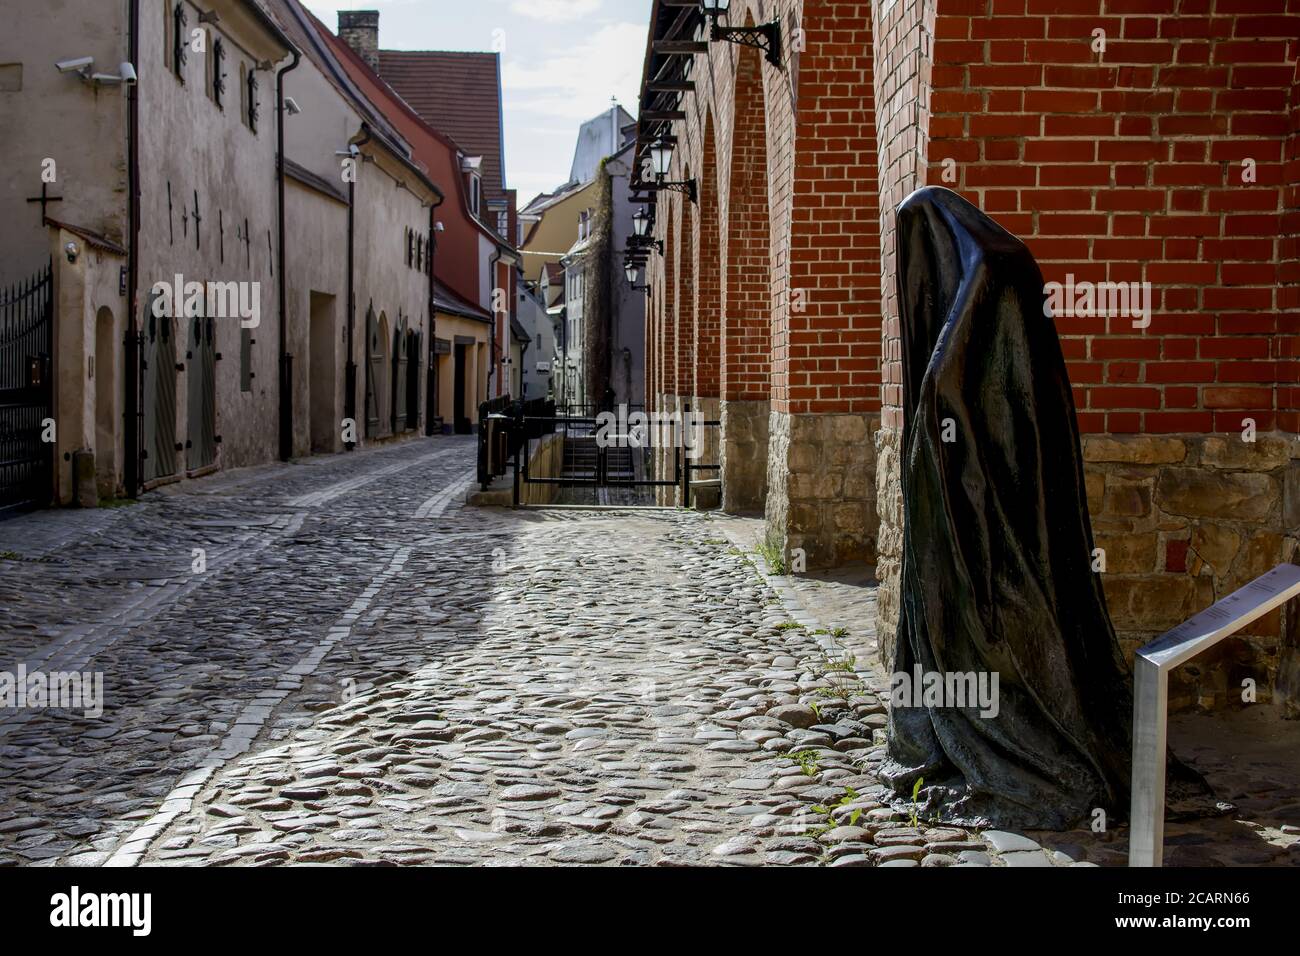 The Ghost bronze sculpture by Ieva Rubeze in Old Town near medieval defence wall Stock Photo